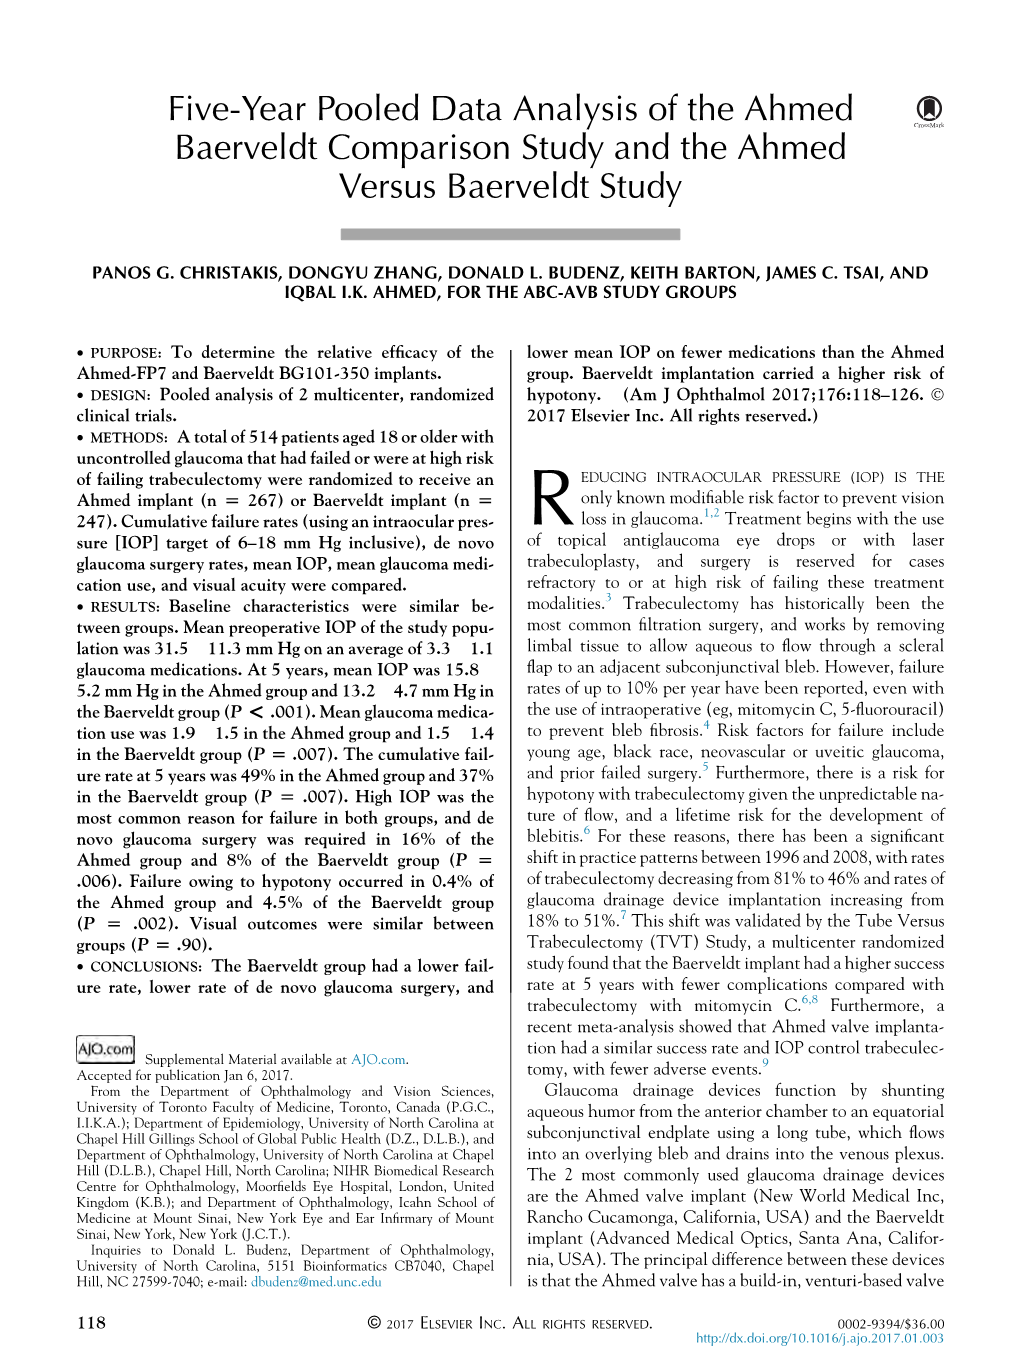 Five-Year Pooled Data Analysis of the Ahmed Baerveldt Comparison Study and the Ahmed Versus Baerveldt Study